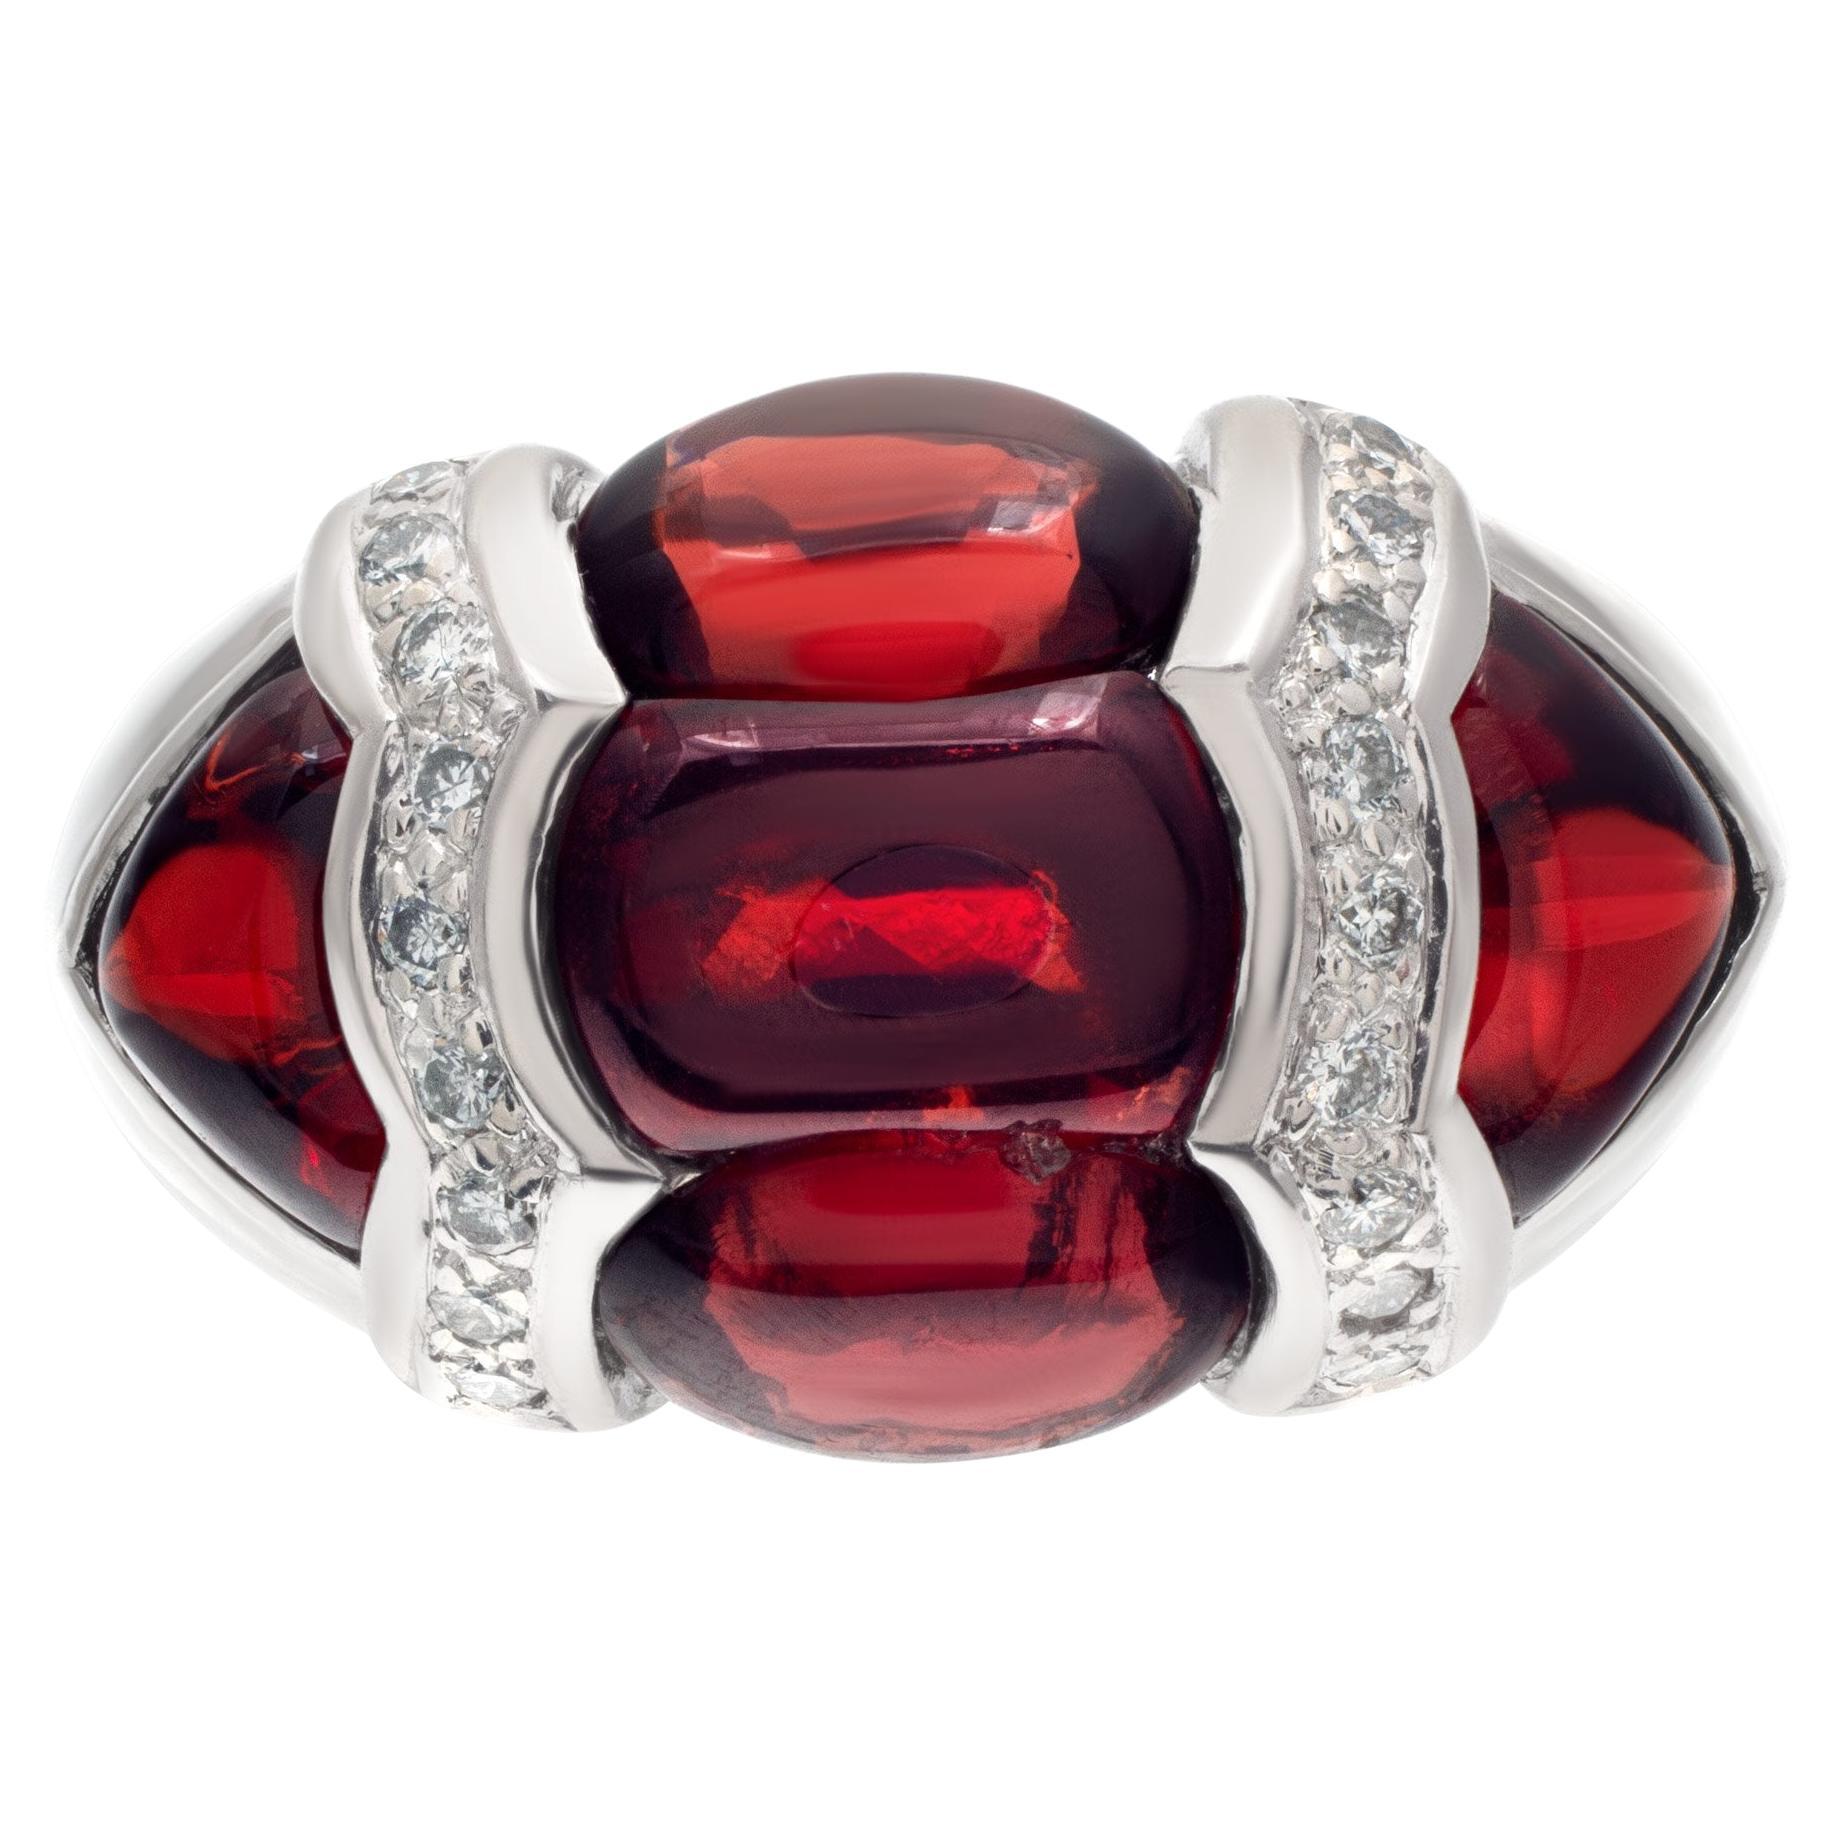 Cabochon Red Garnet Ring with Diamond Accents in 18k White Gold